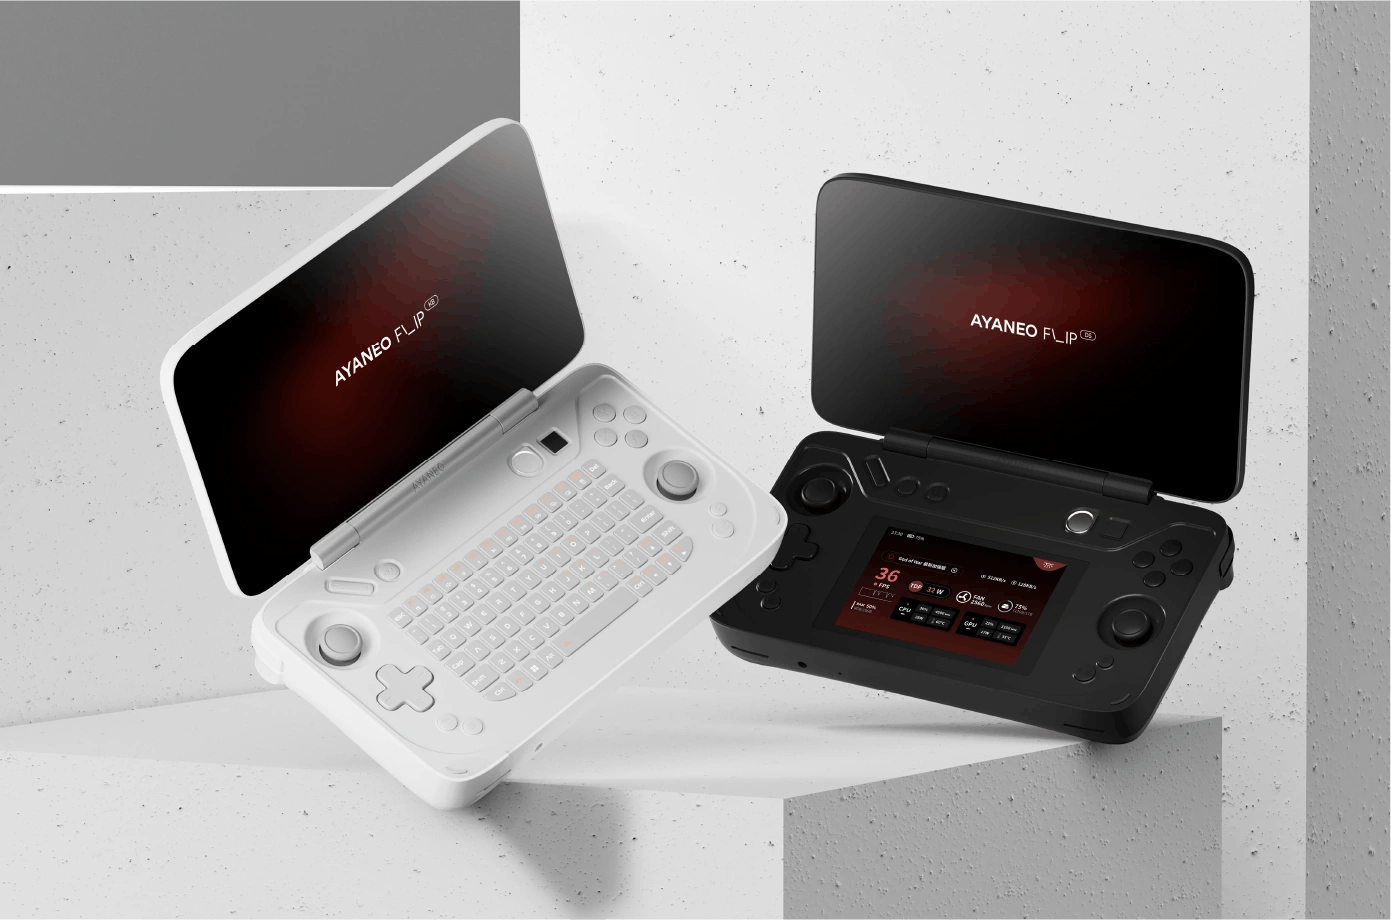 The New Mobile Gaming Computer-The Aya Neo-Is Now Available - mxdwn Games